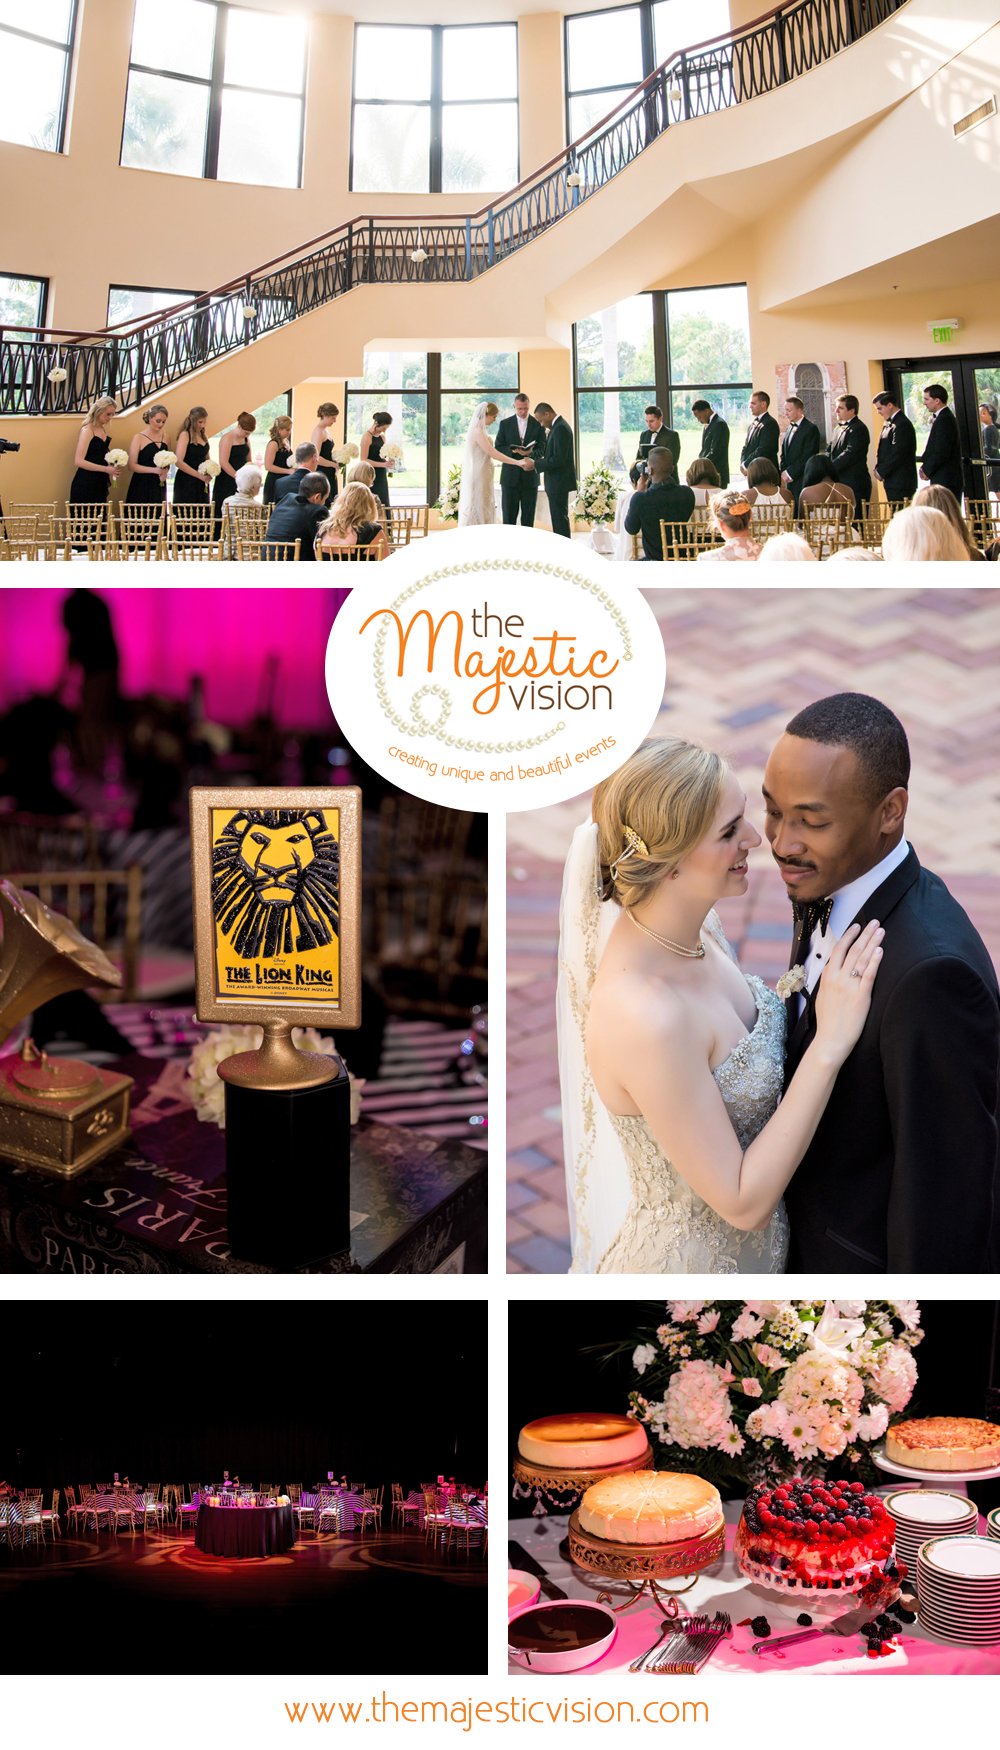 Elegant Broadway Theme Wedding Reception | The Majestic Vision Wedding Planning | The Borland Center in Palm Beach, FL | www.themajesticvision.com | Enduring Impressions Photography